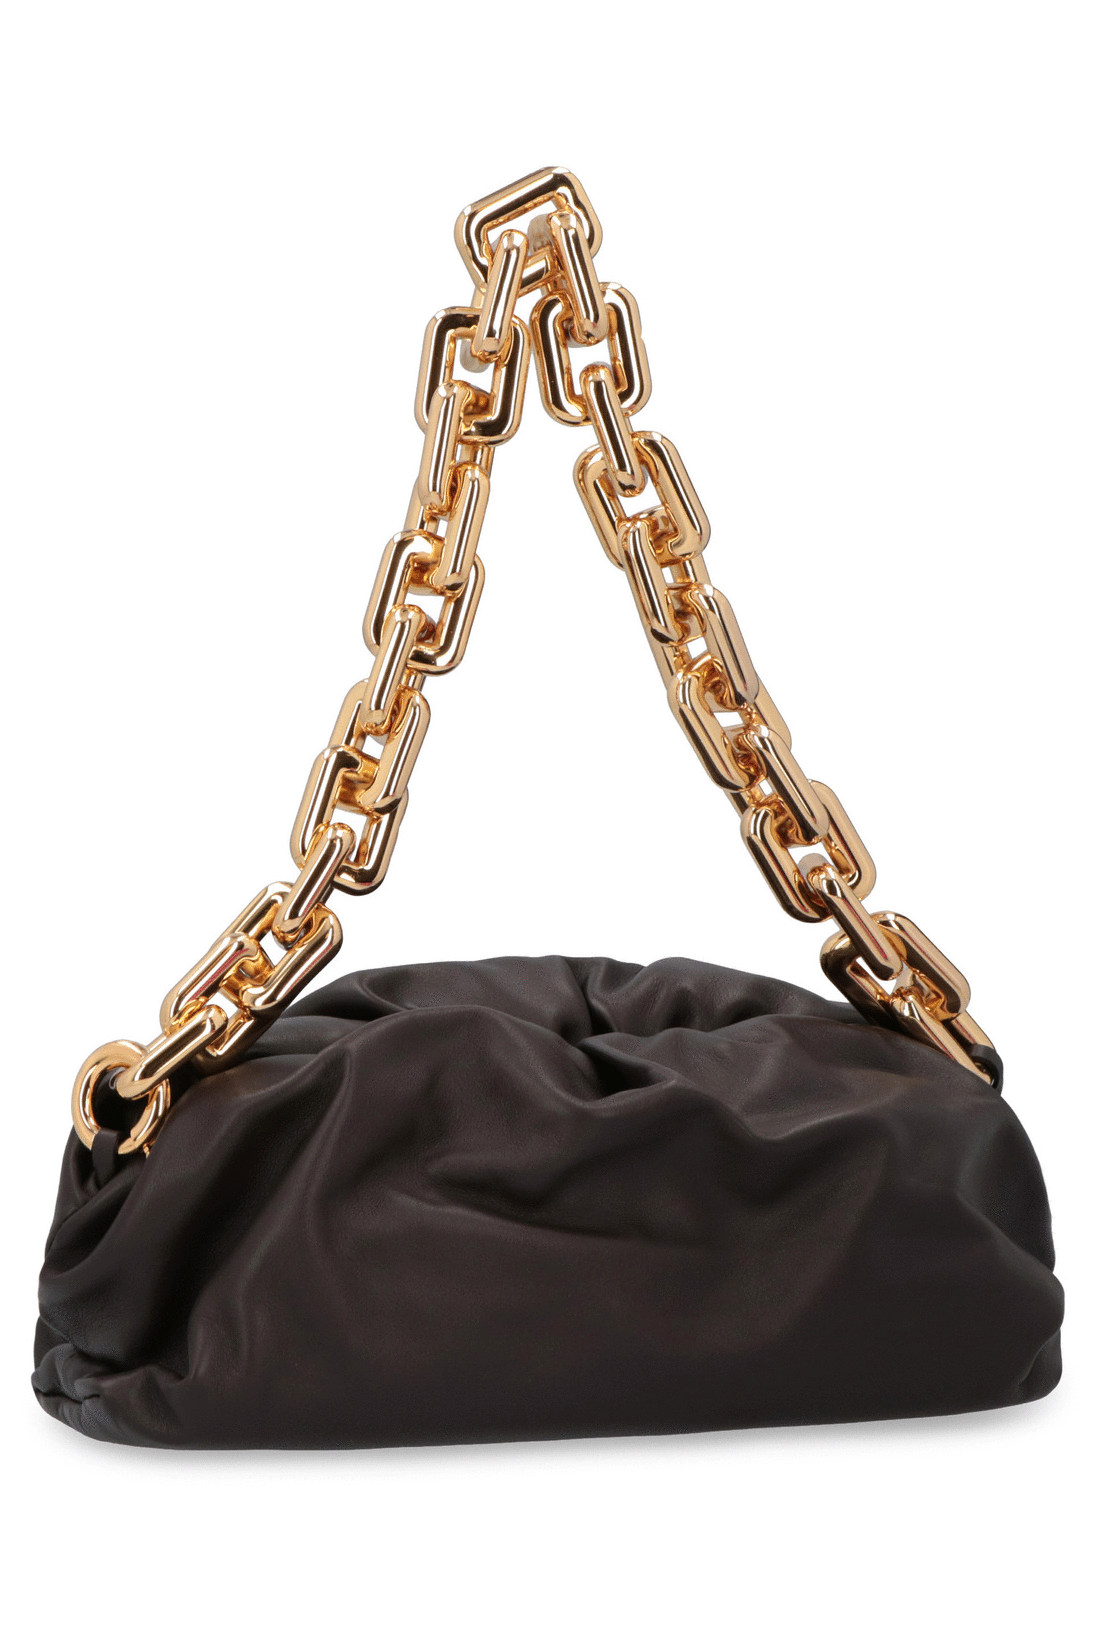 The Chain Pouch leather clutch